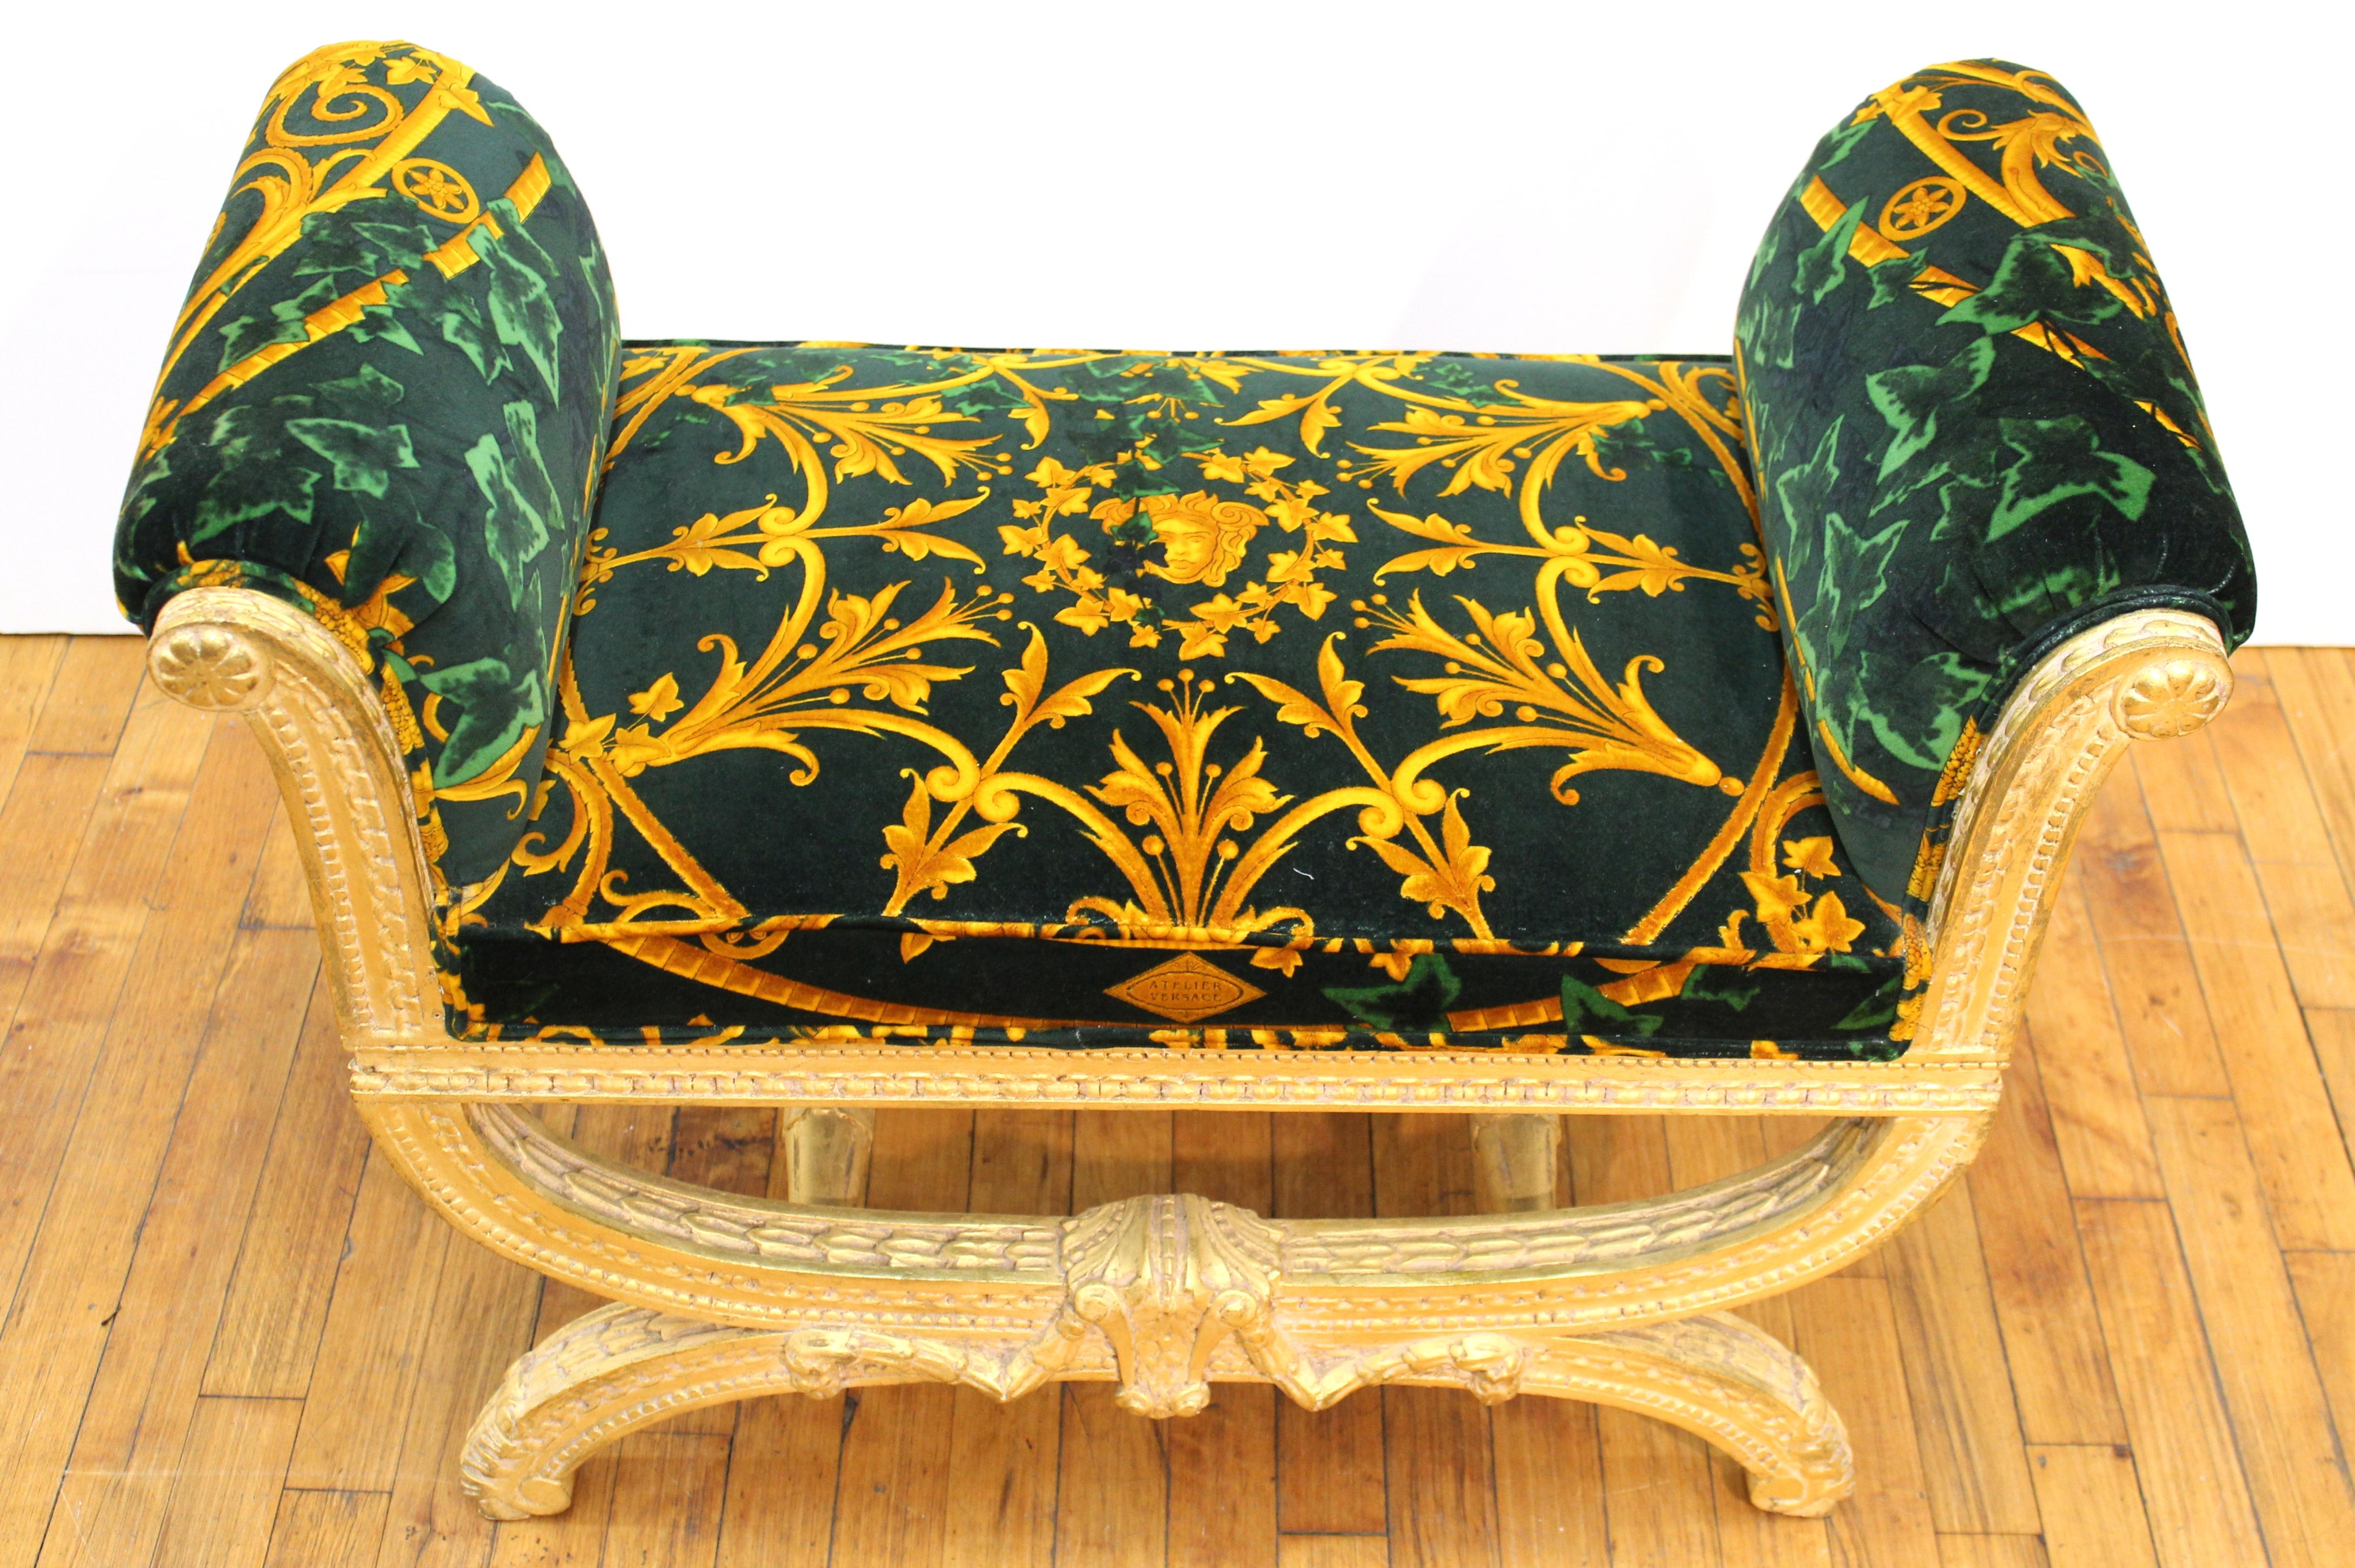 Versace Italian gilt wood frame bench with Versace velvet upholstery in bright gold and green with baroque design elements. The piece was made in the 1980s and has the Versace logo on the front of the velvet.